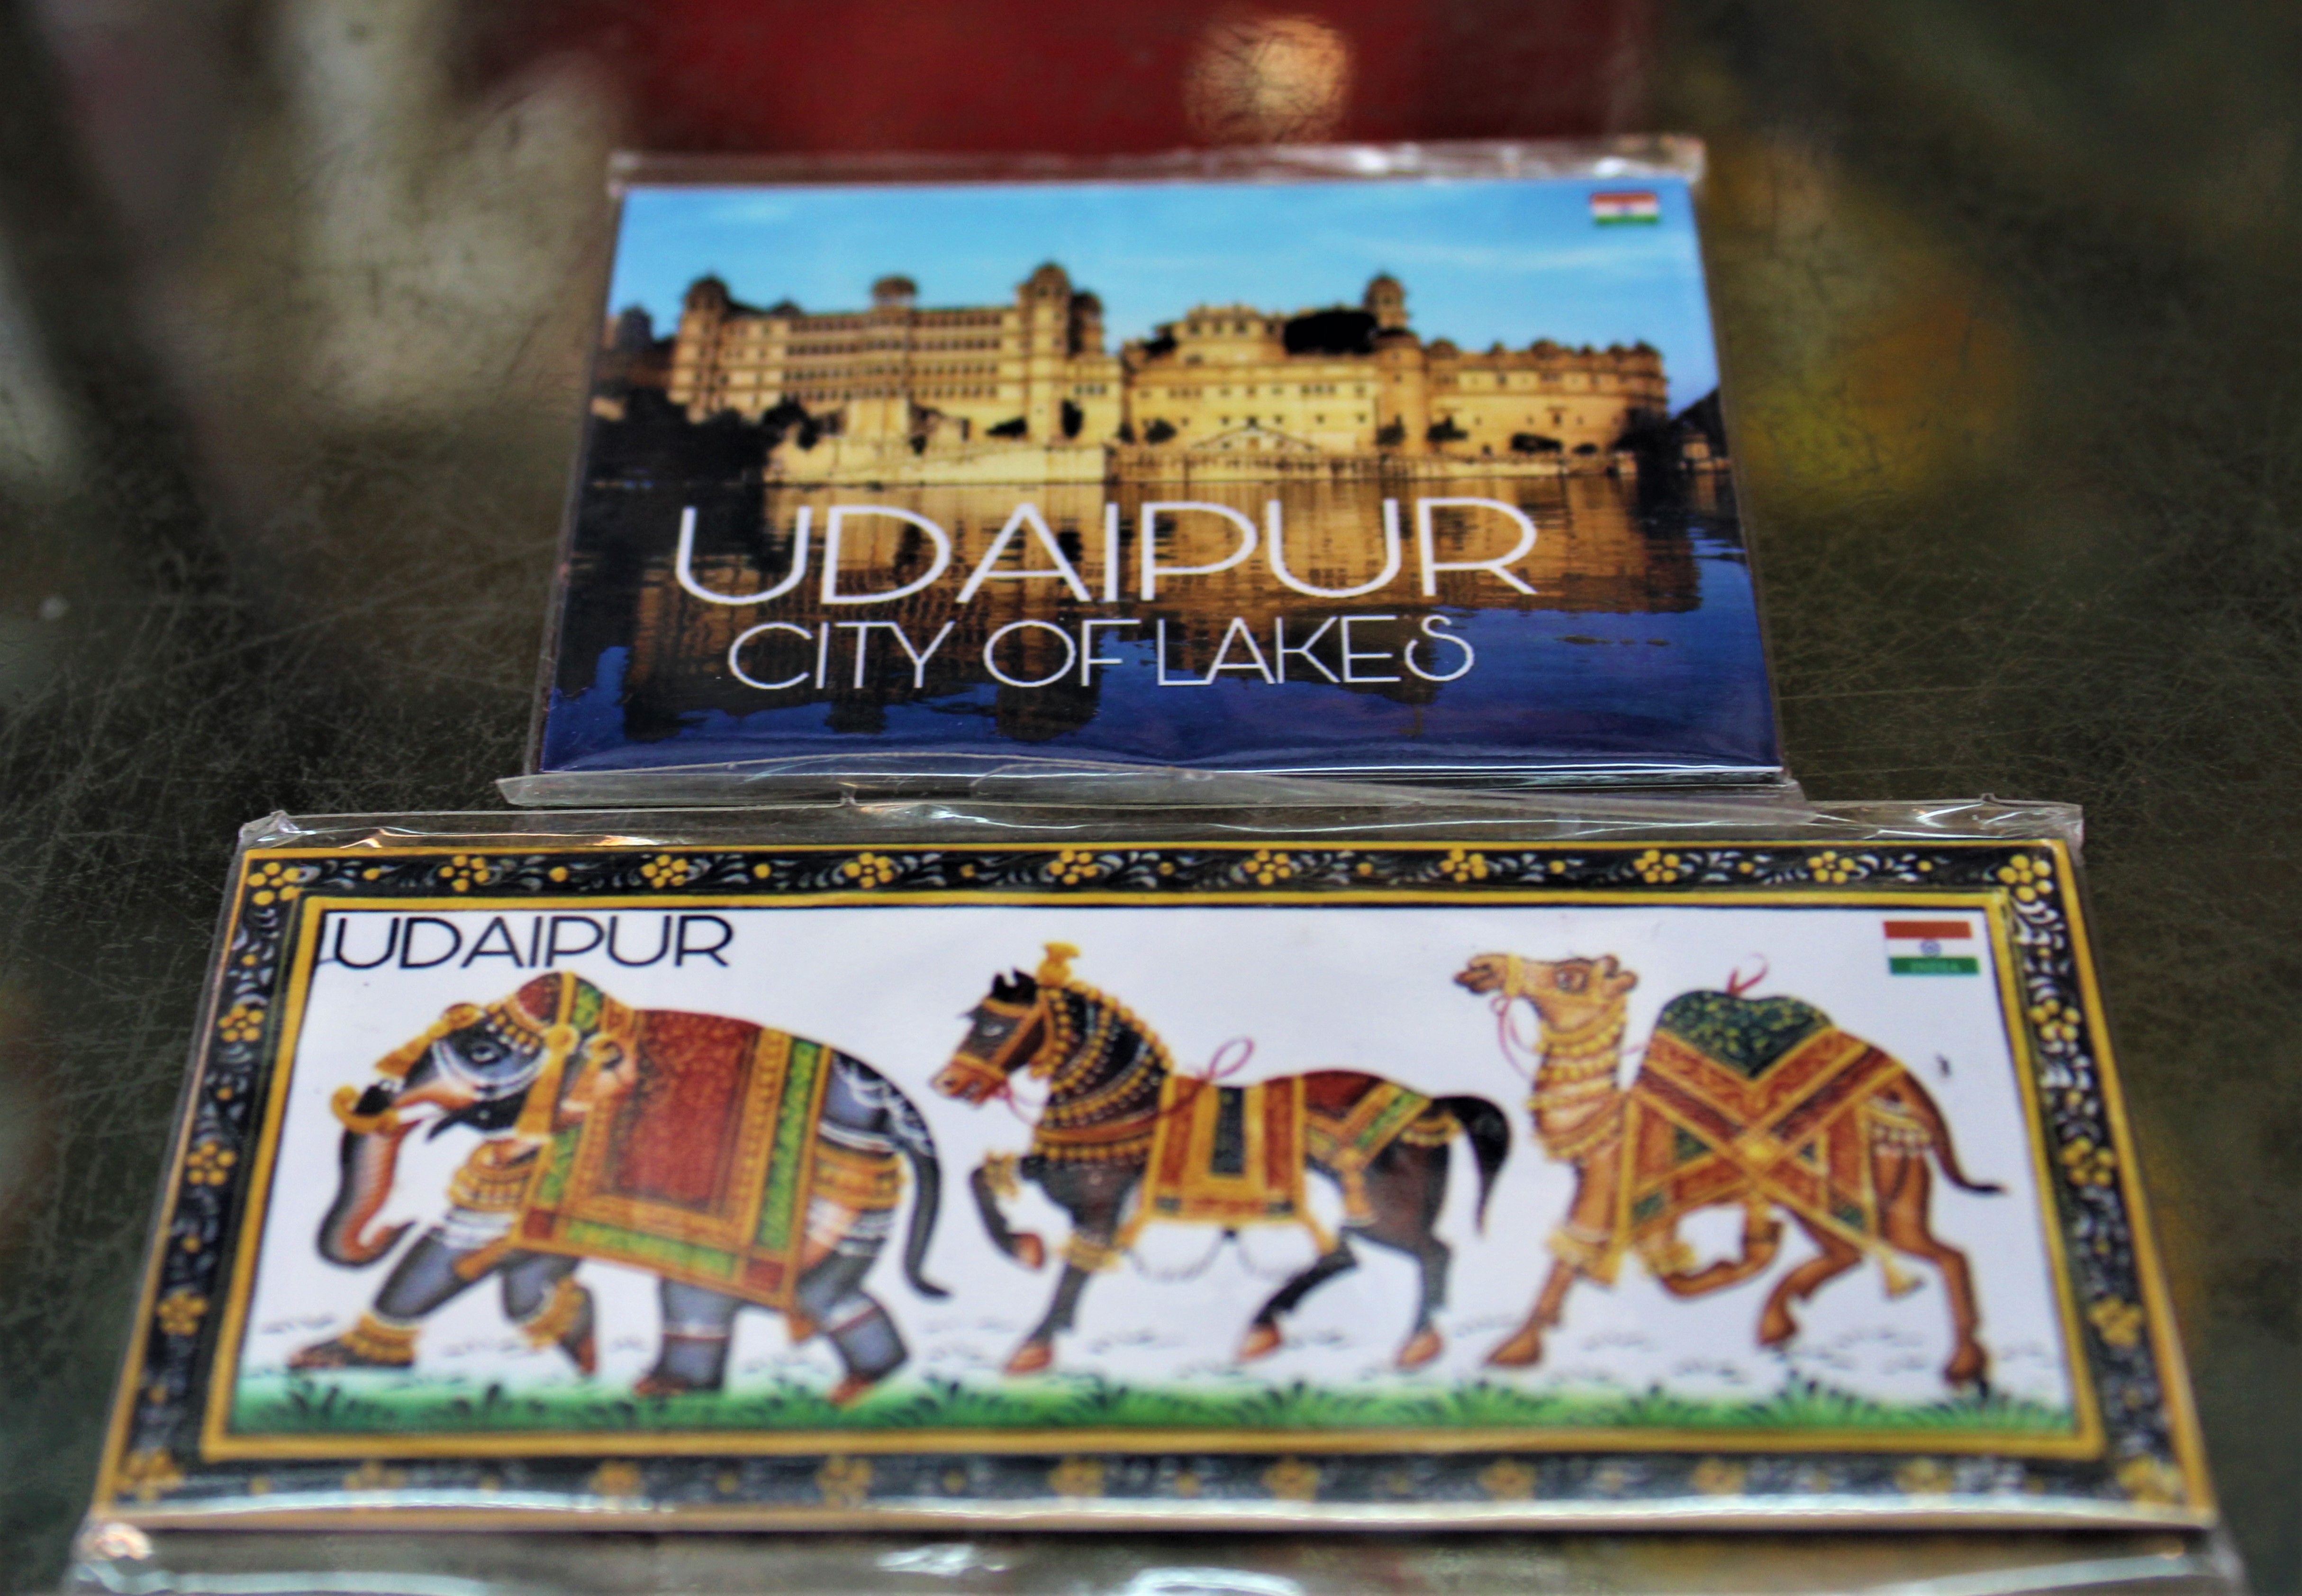 What all to take away from Udaipur with just ₹500?